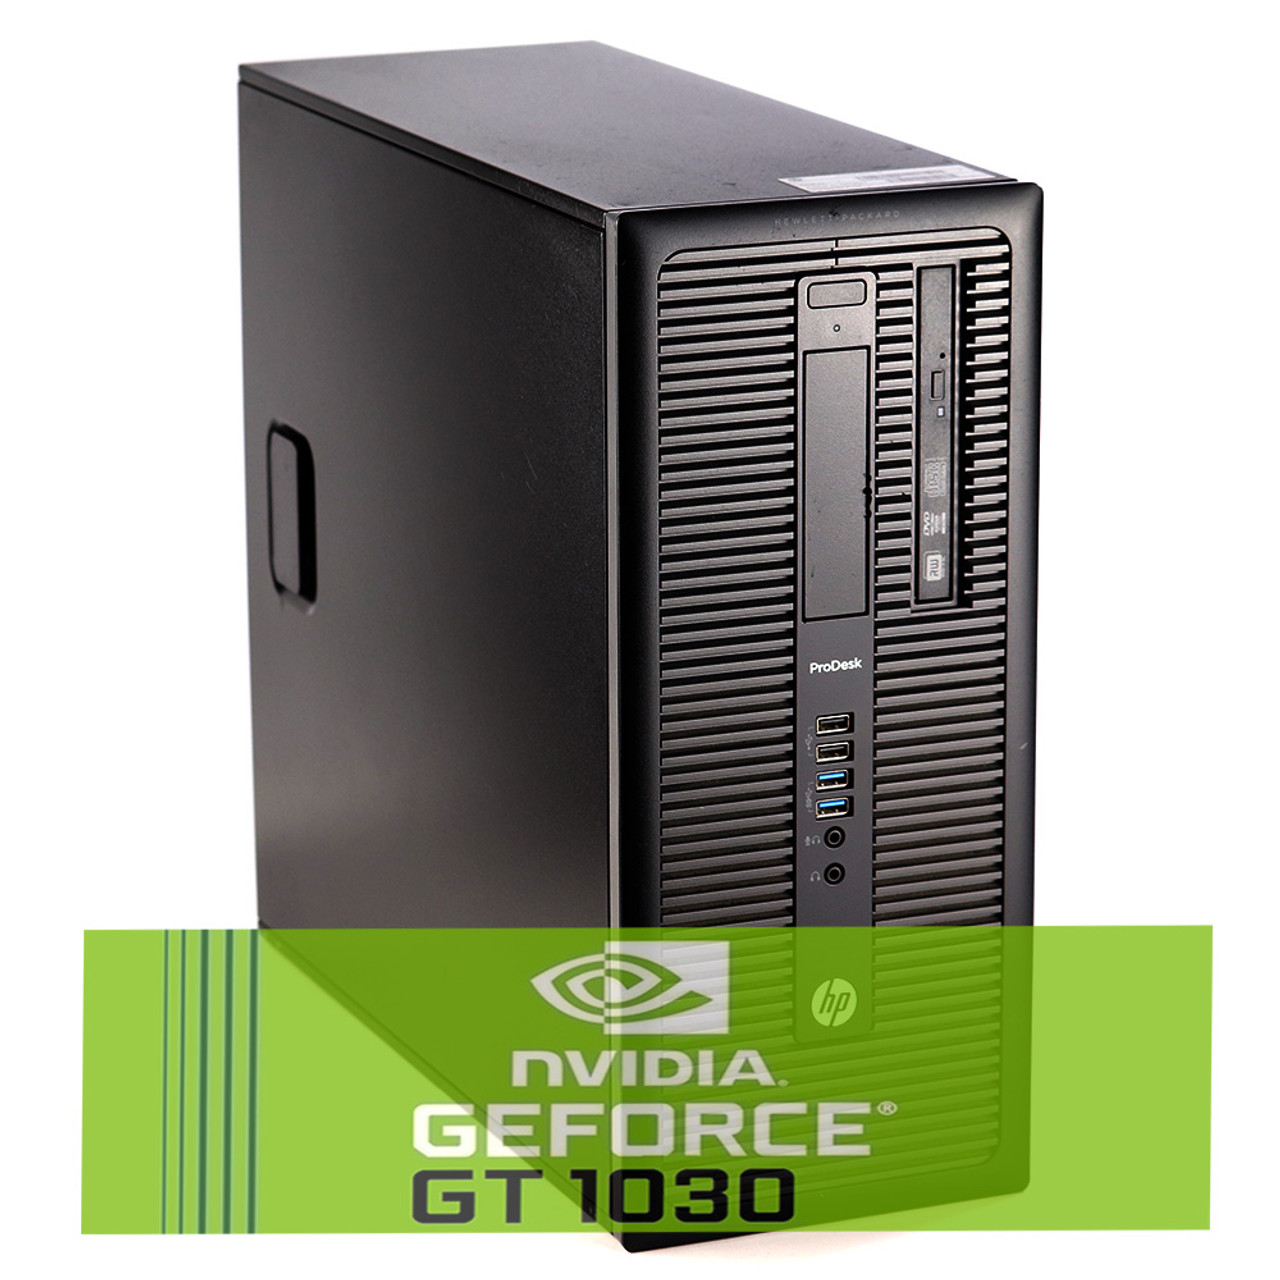 HP Desktop Gaming Computer 600 G1 Tower Core i5 16GB 1TB with Nvidia GT 1030  Windows 10 PC